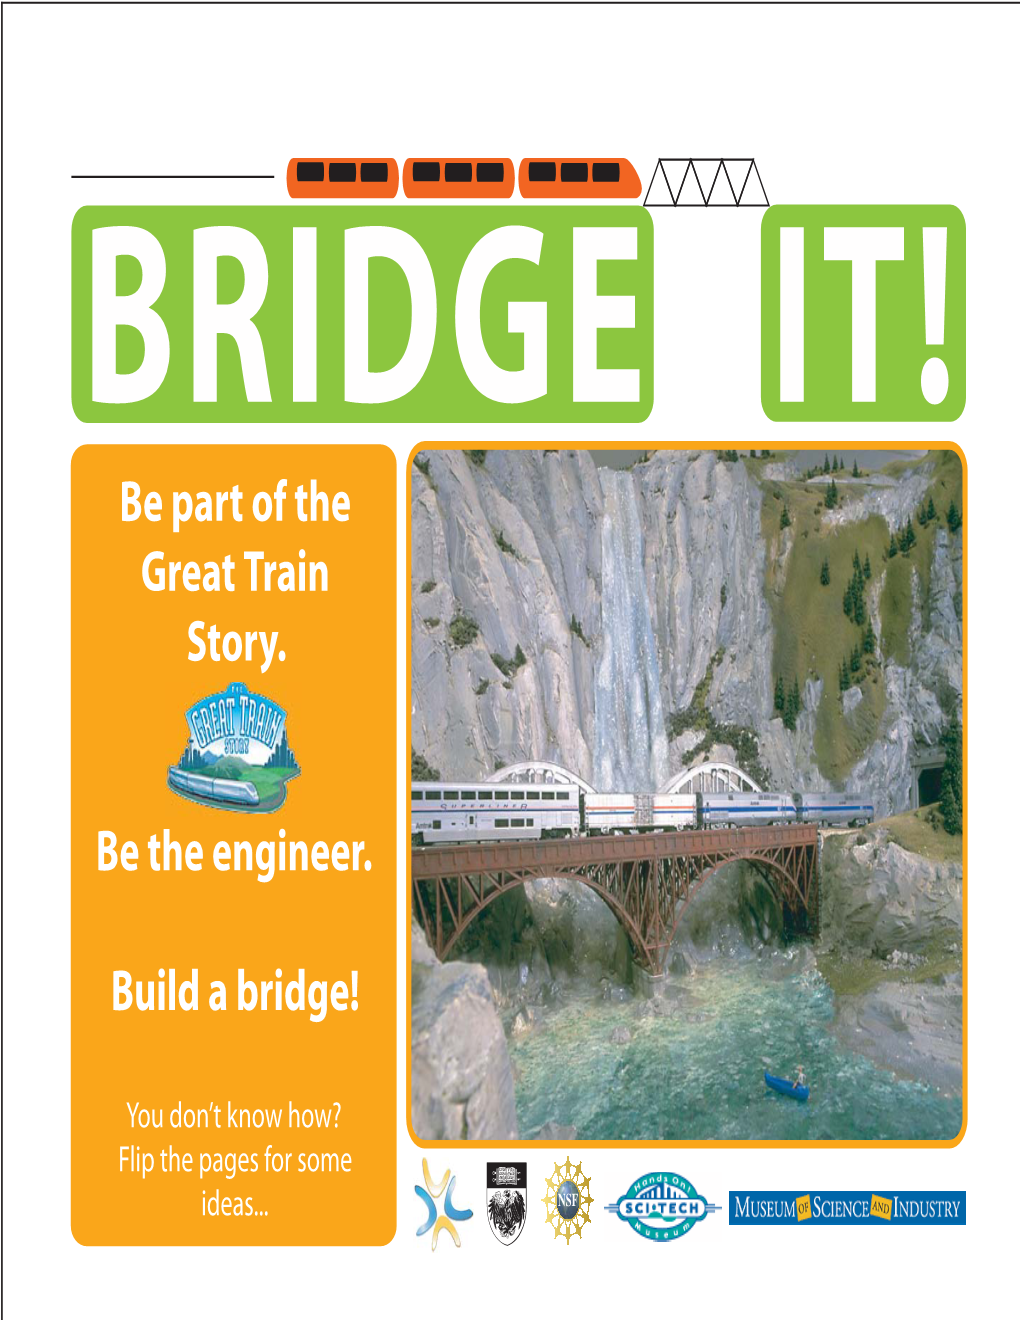 BRIDGE IT! Be Part of the Great Train Story